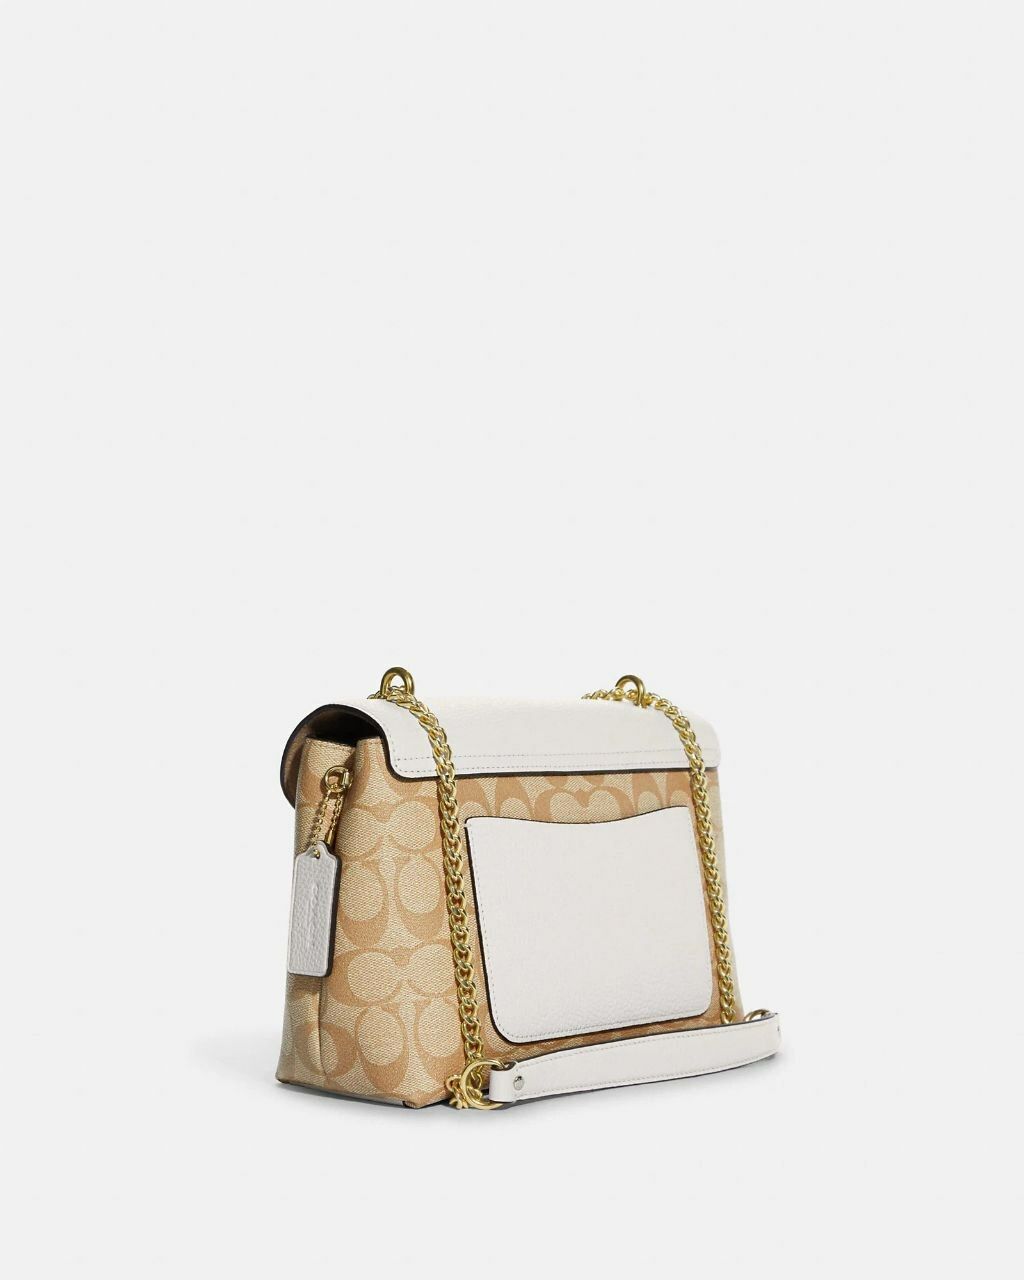 Tammie Shoulder Bag In Signature Canvas With Floral Whipstitch1.jpg